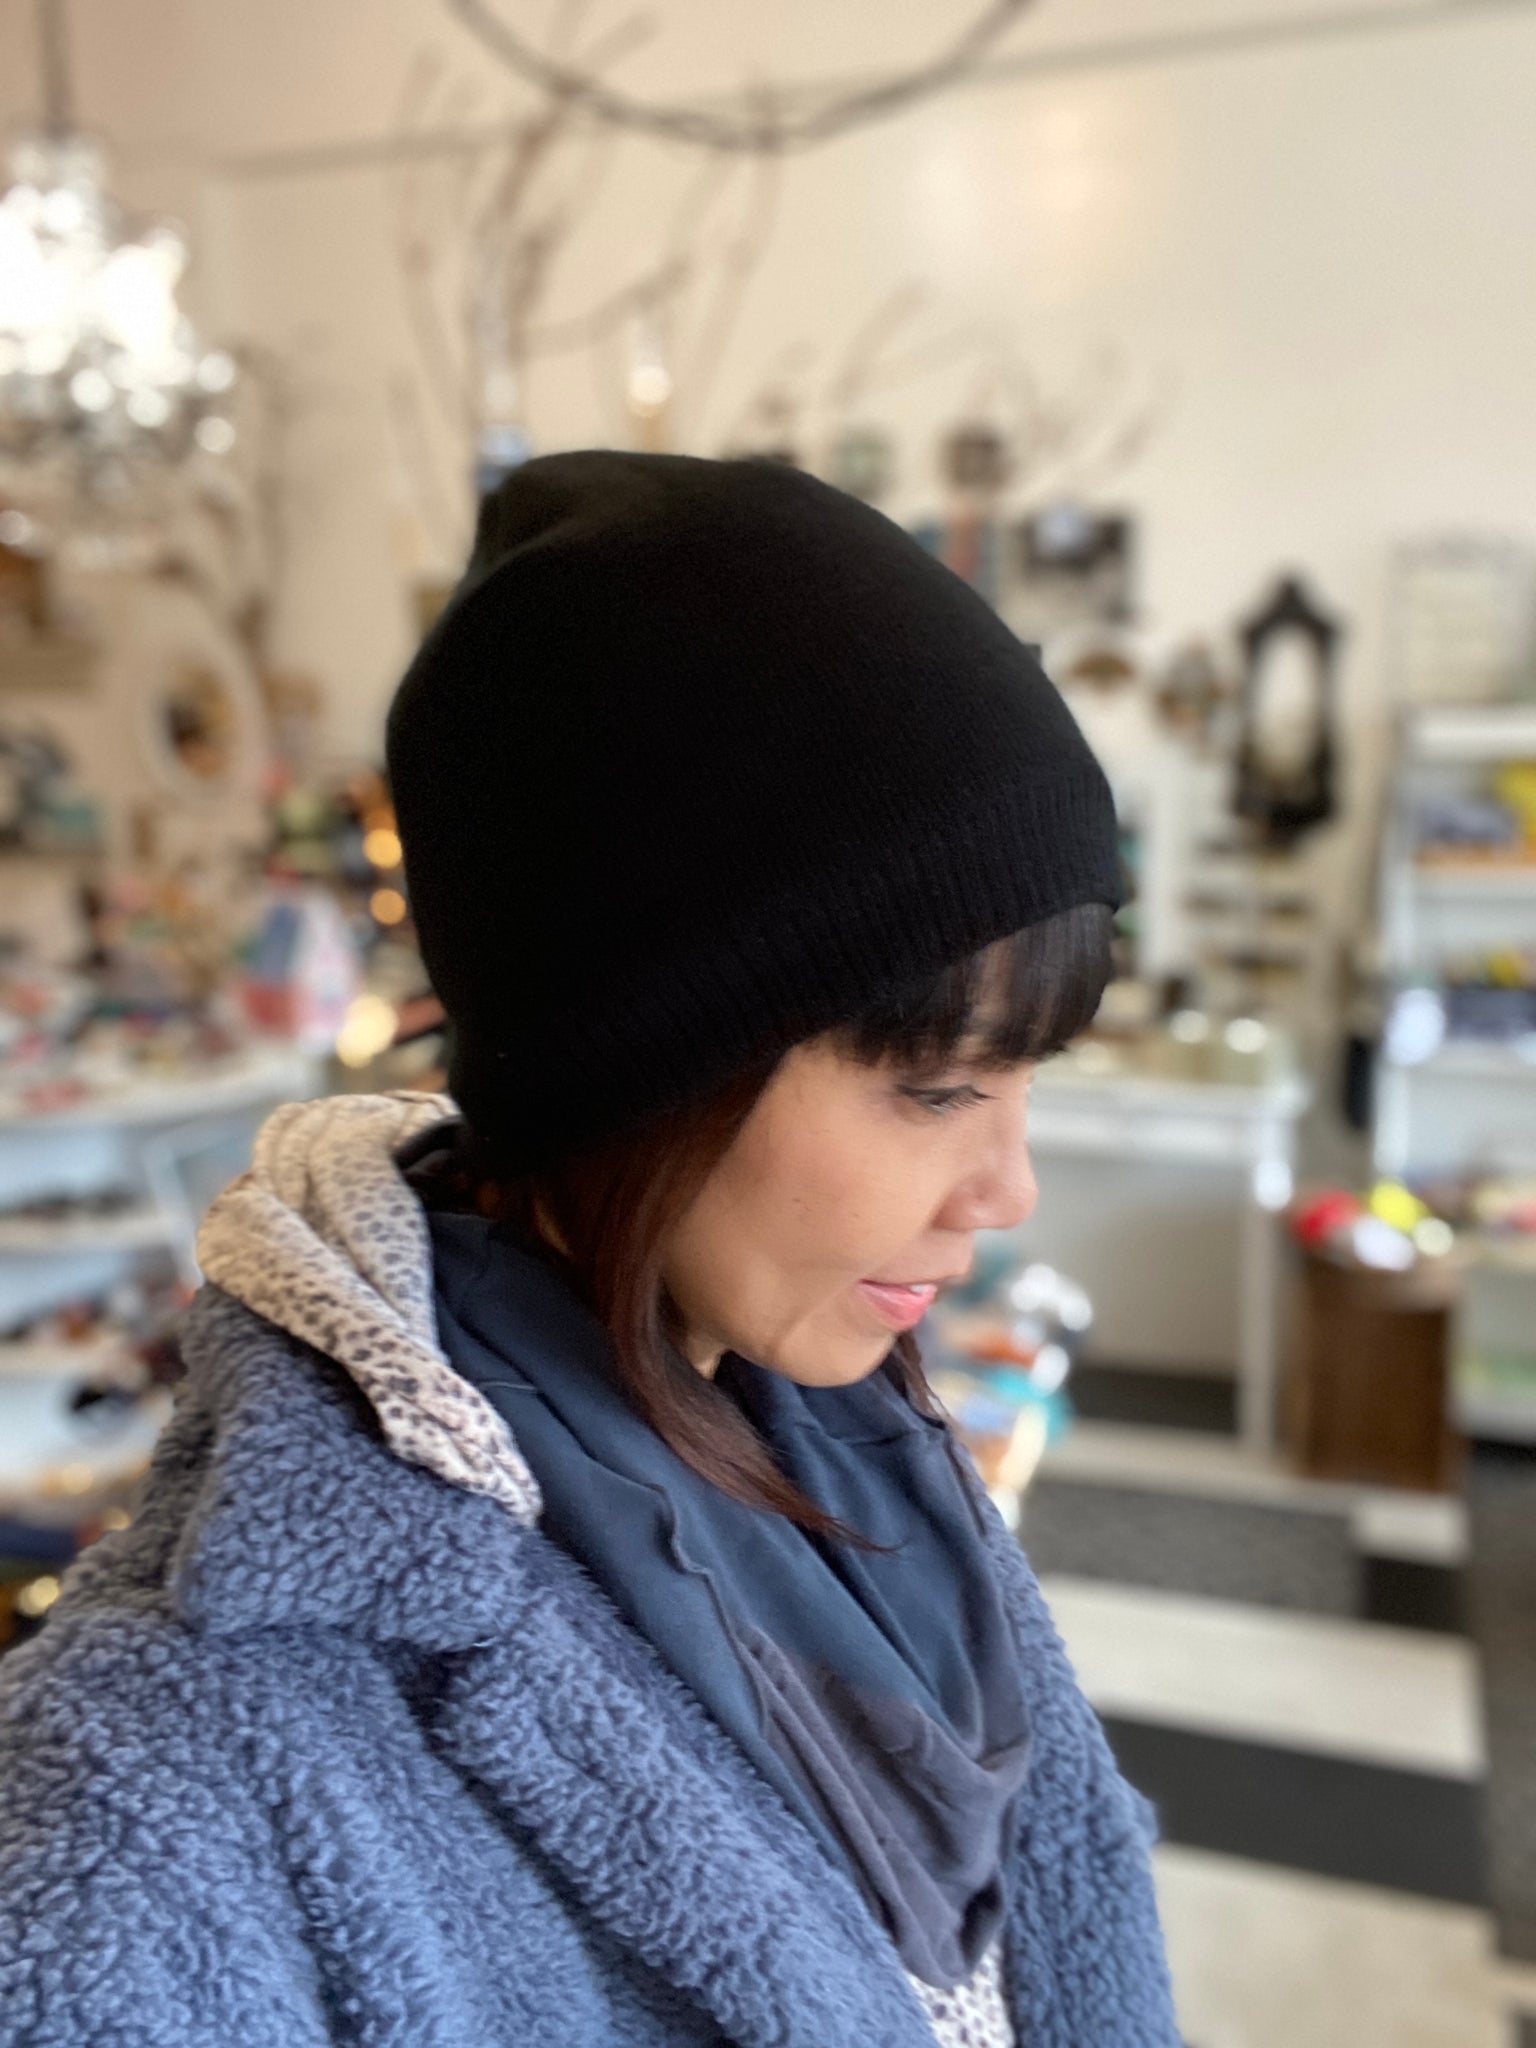 Basic Knit Solid Black Beanie with Lining for Extra Warm